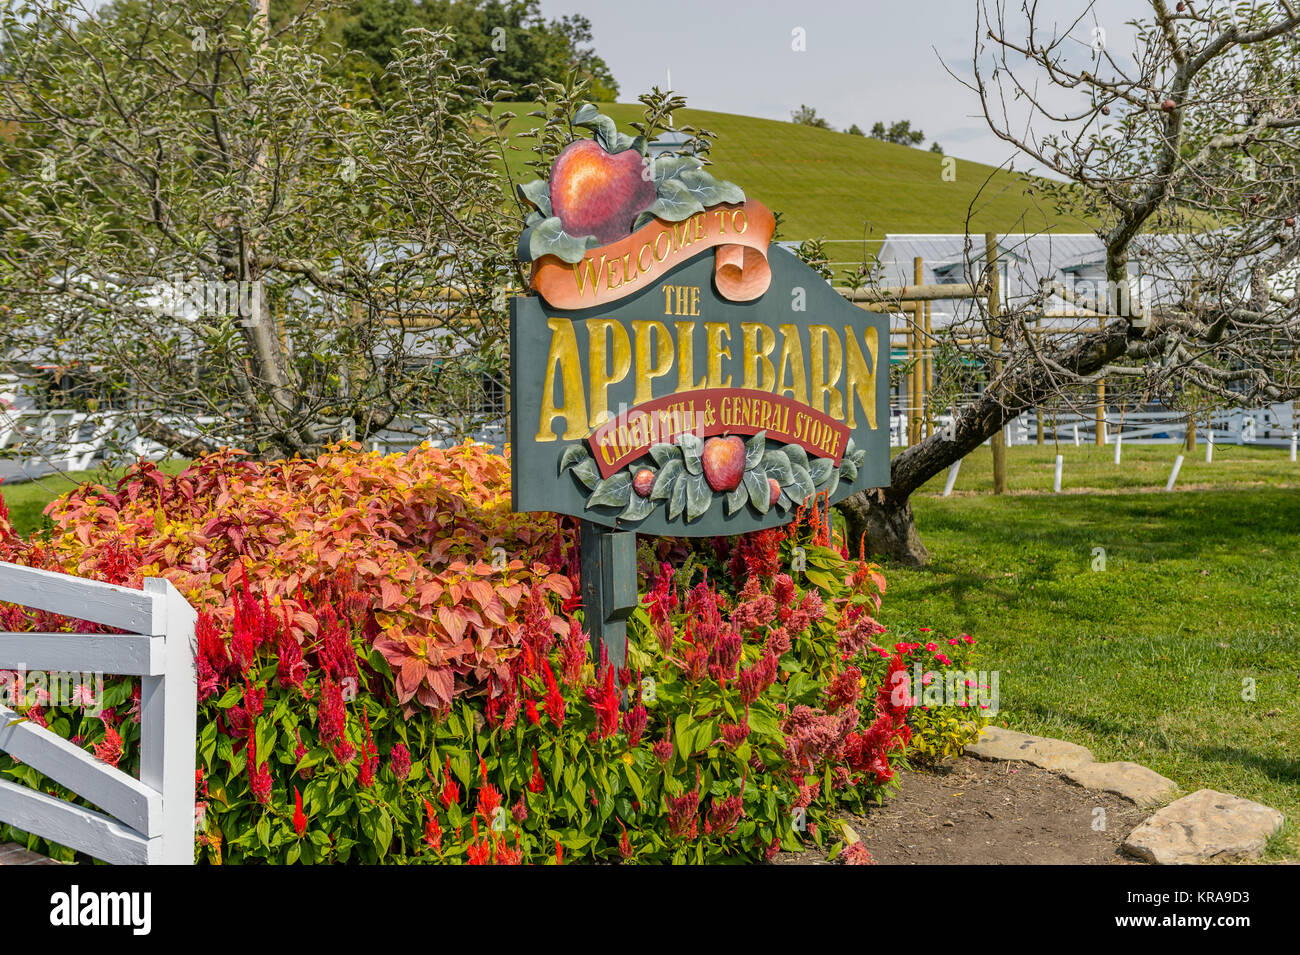 Entrance sign or signage to The Apple Barn Cider Mill and General Store in Sevierville TN, USA, a tourist attraction in Tennessee apple country. Stock Photo